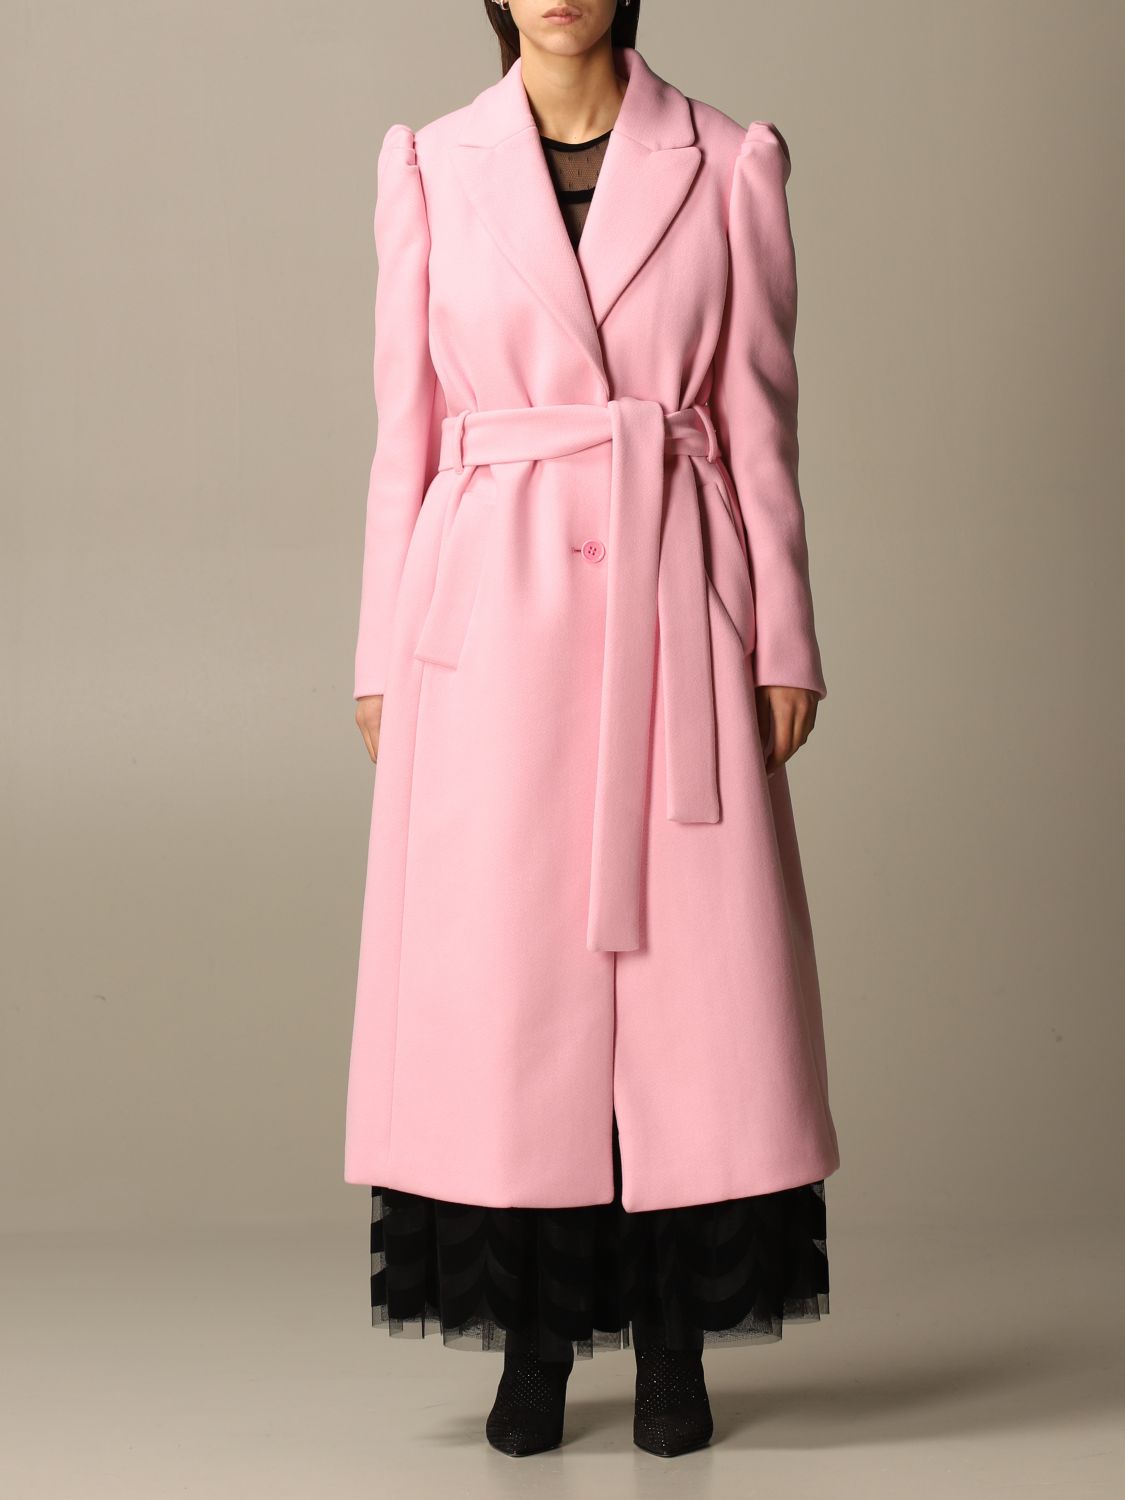 for woman - Pink | Red Valentino coat UROCAC10 497 online at GIGLIO.COM